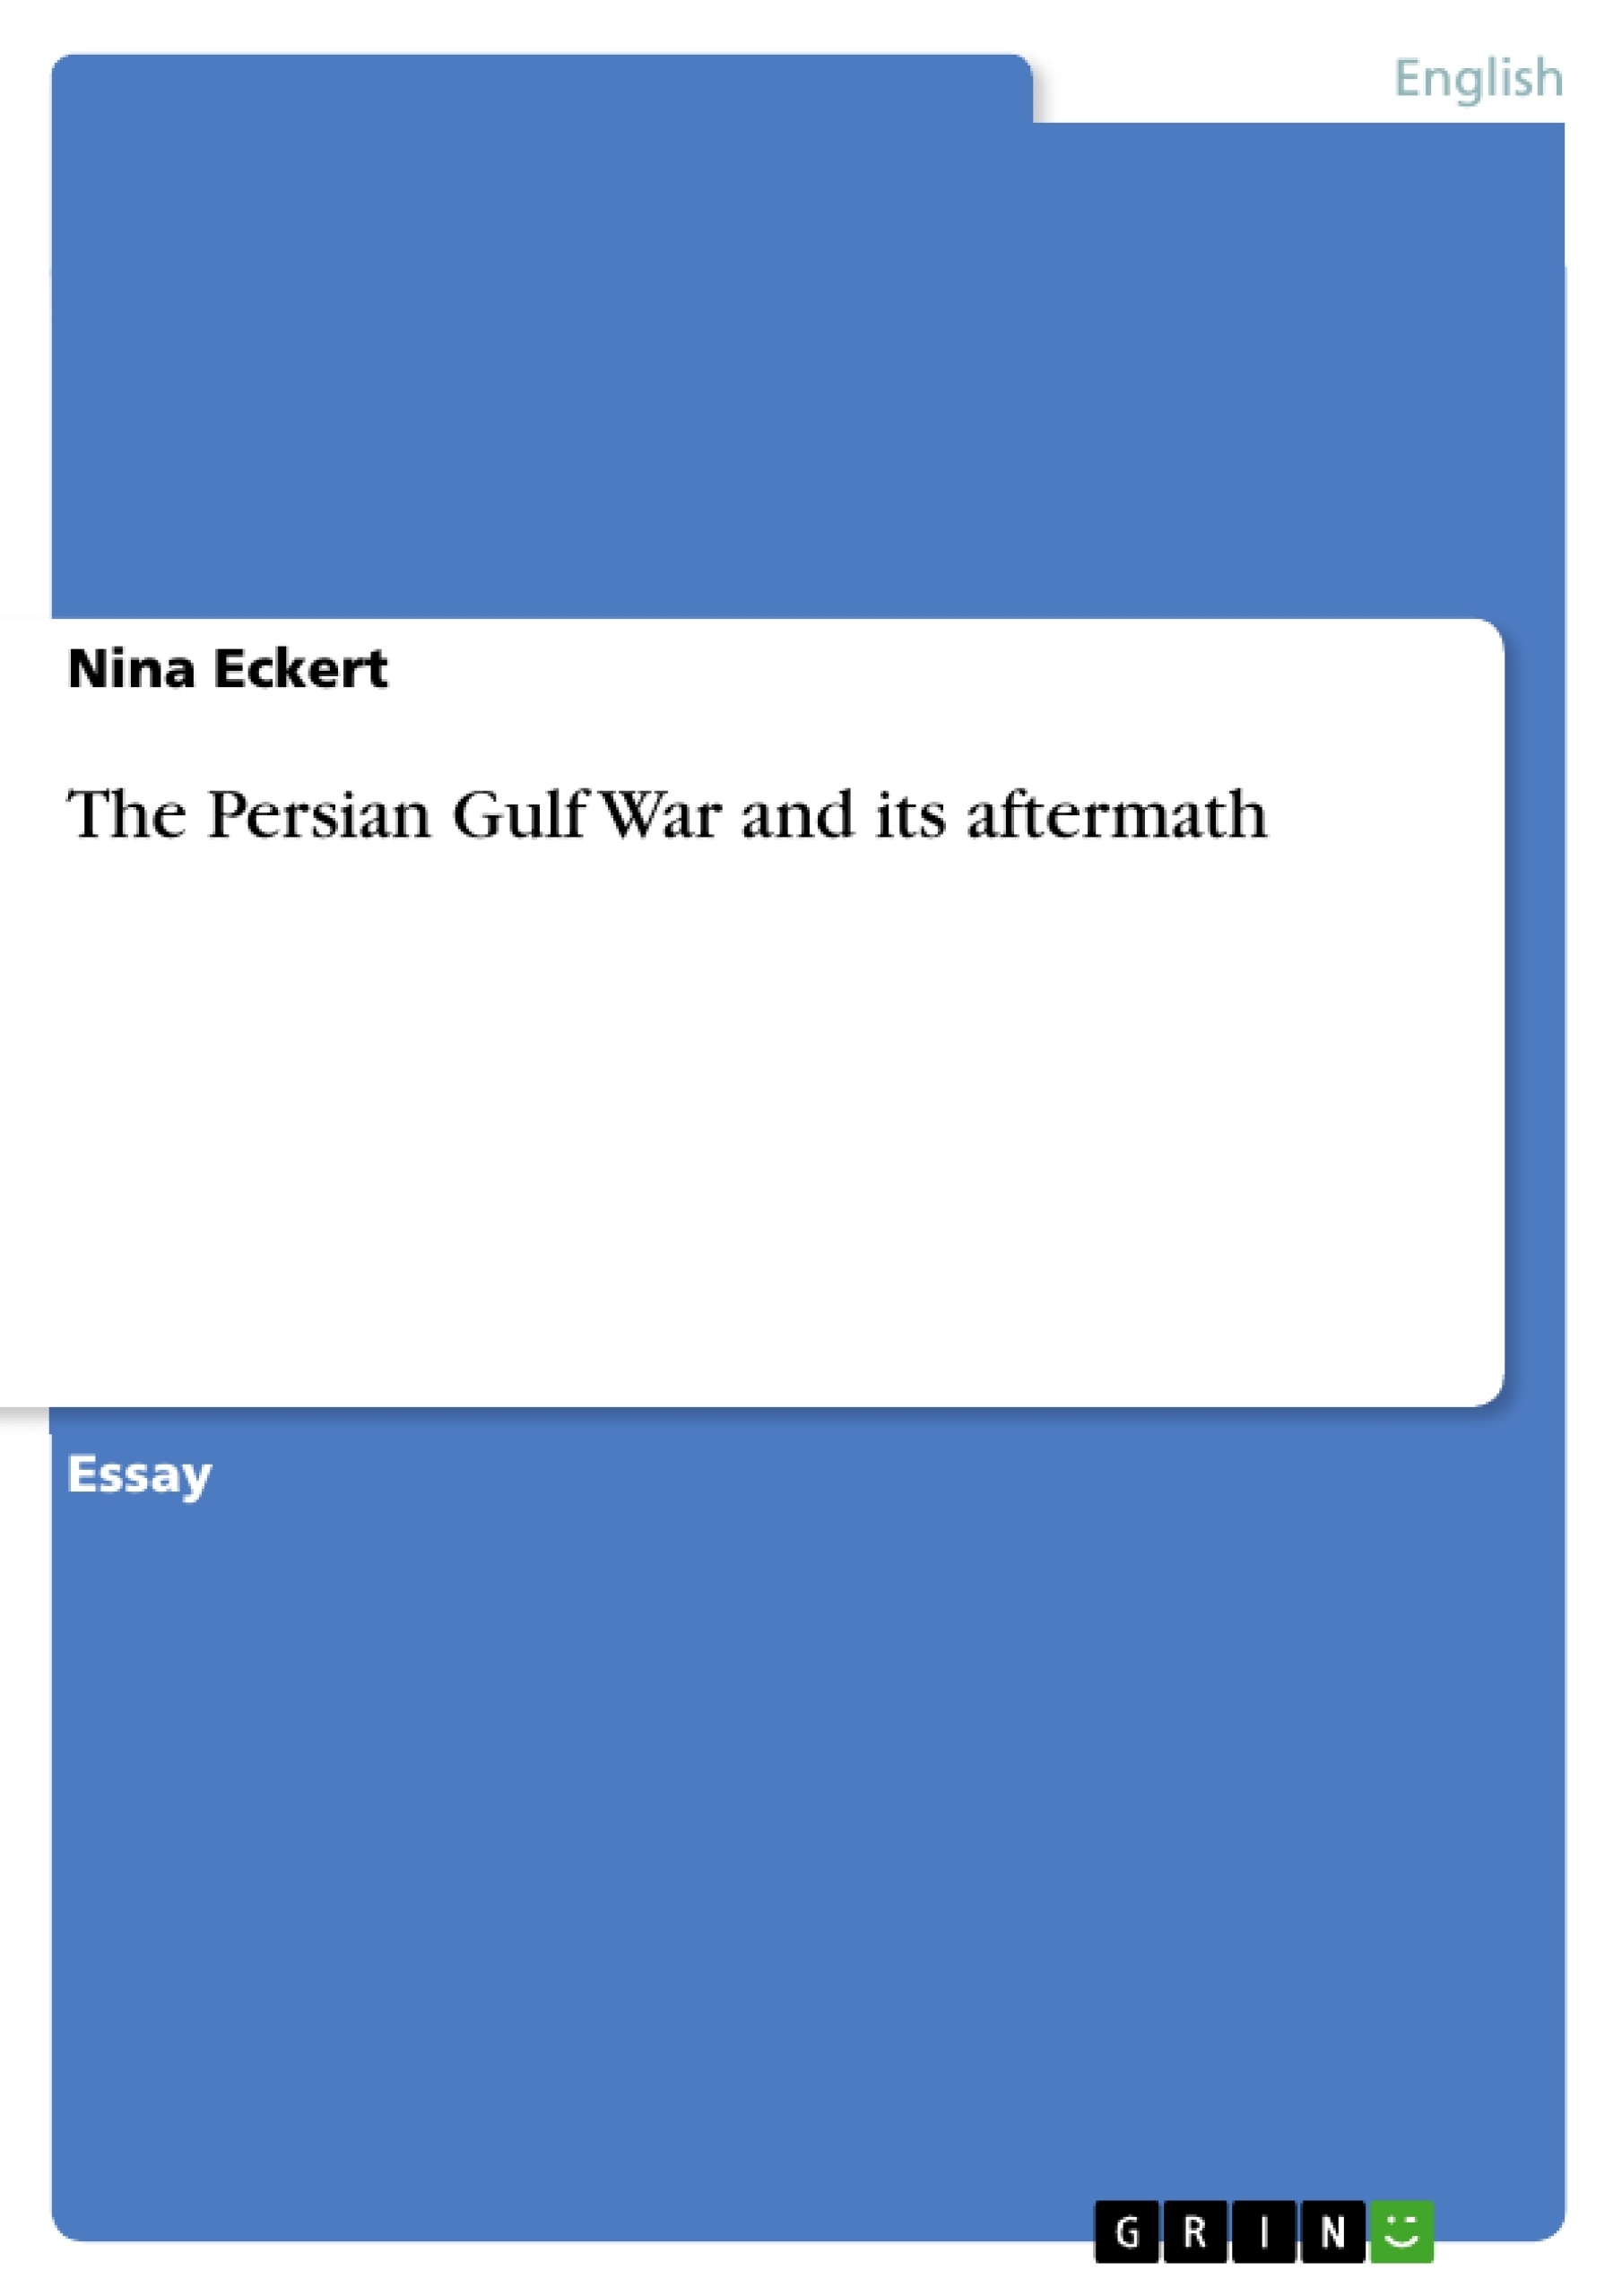 Título: The Persian Gulf War and its aftermath